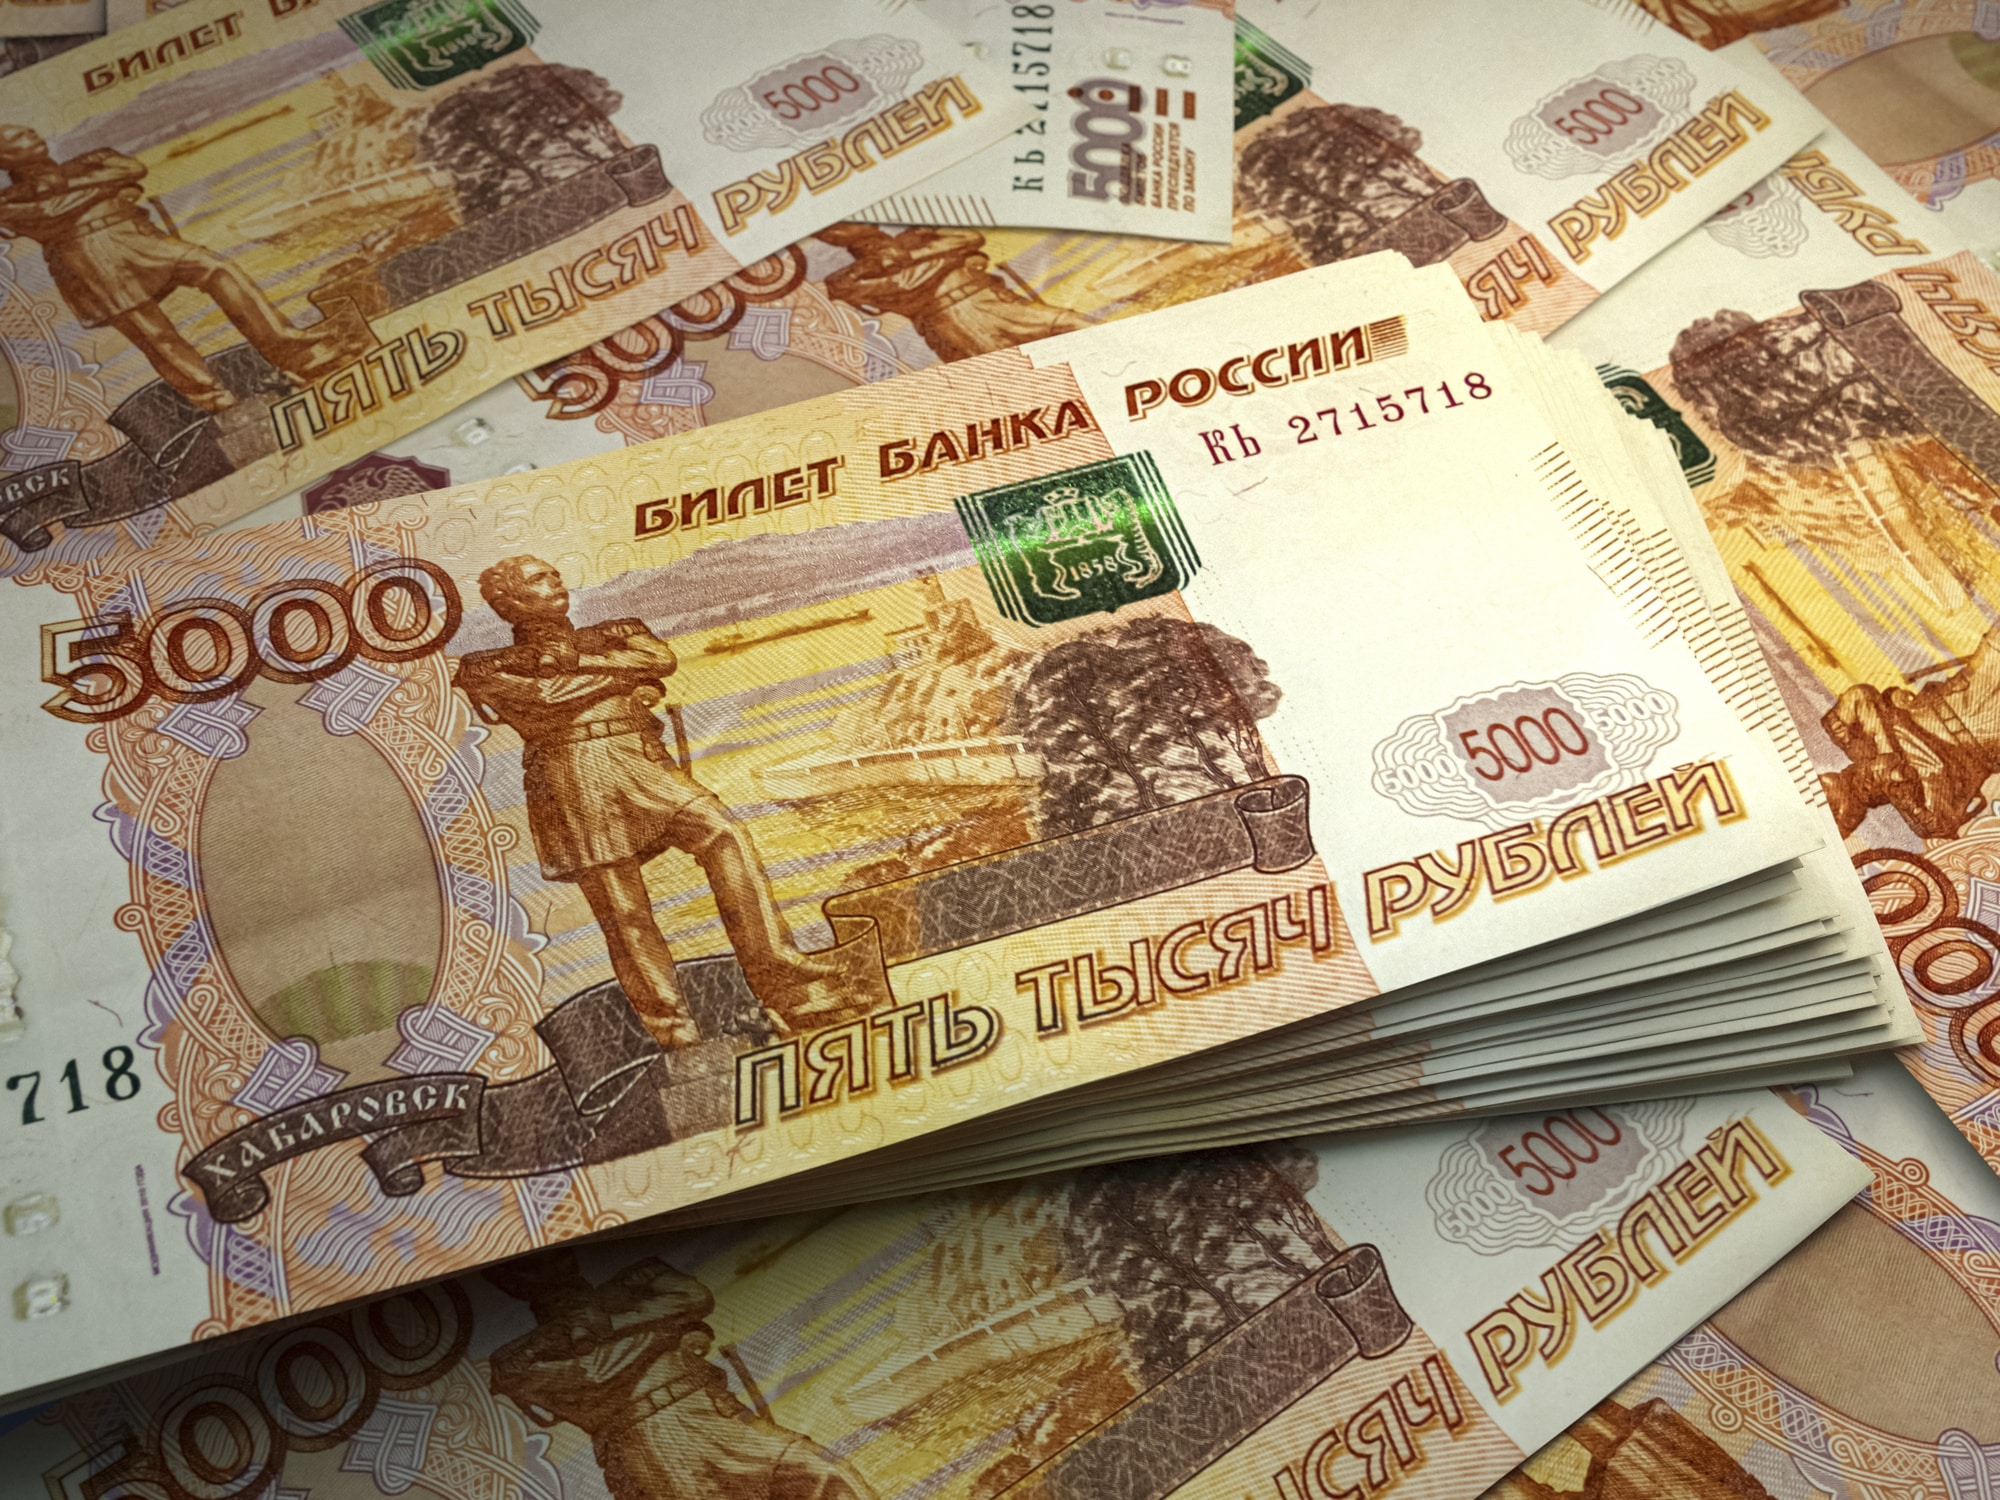 Money of Russia. Russian ruble bills. RUB banknotes. 5000 rubles. Business, finance, news background.